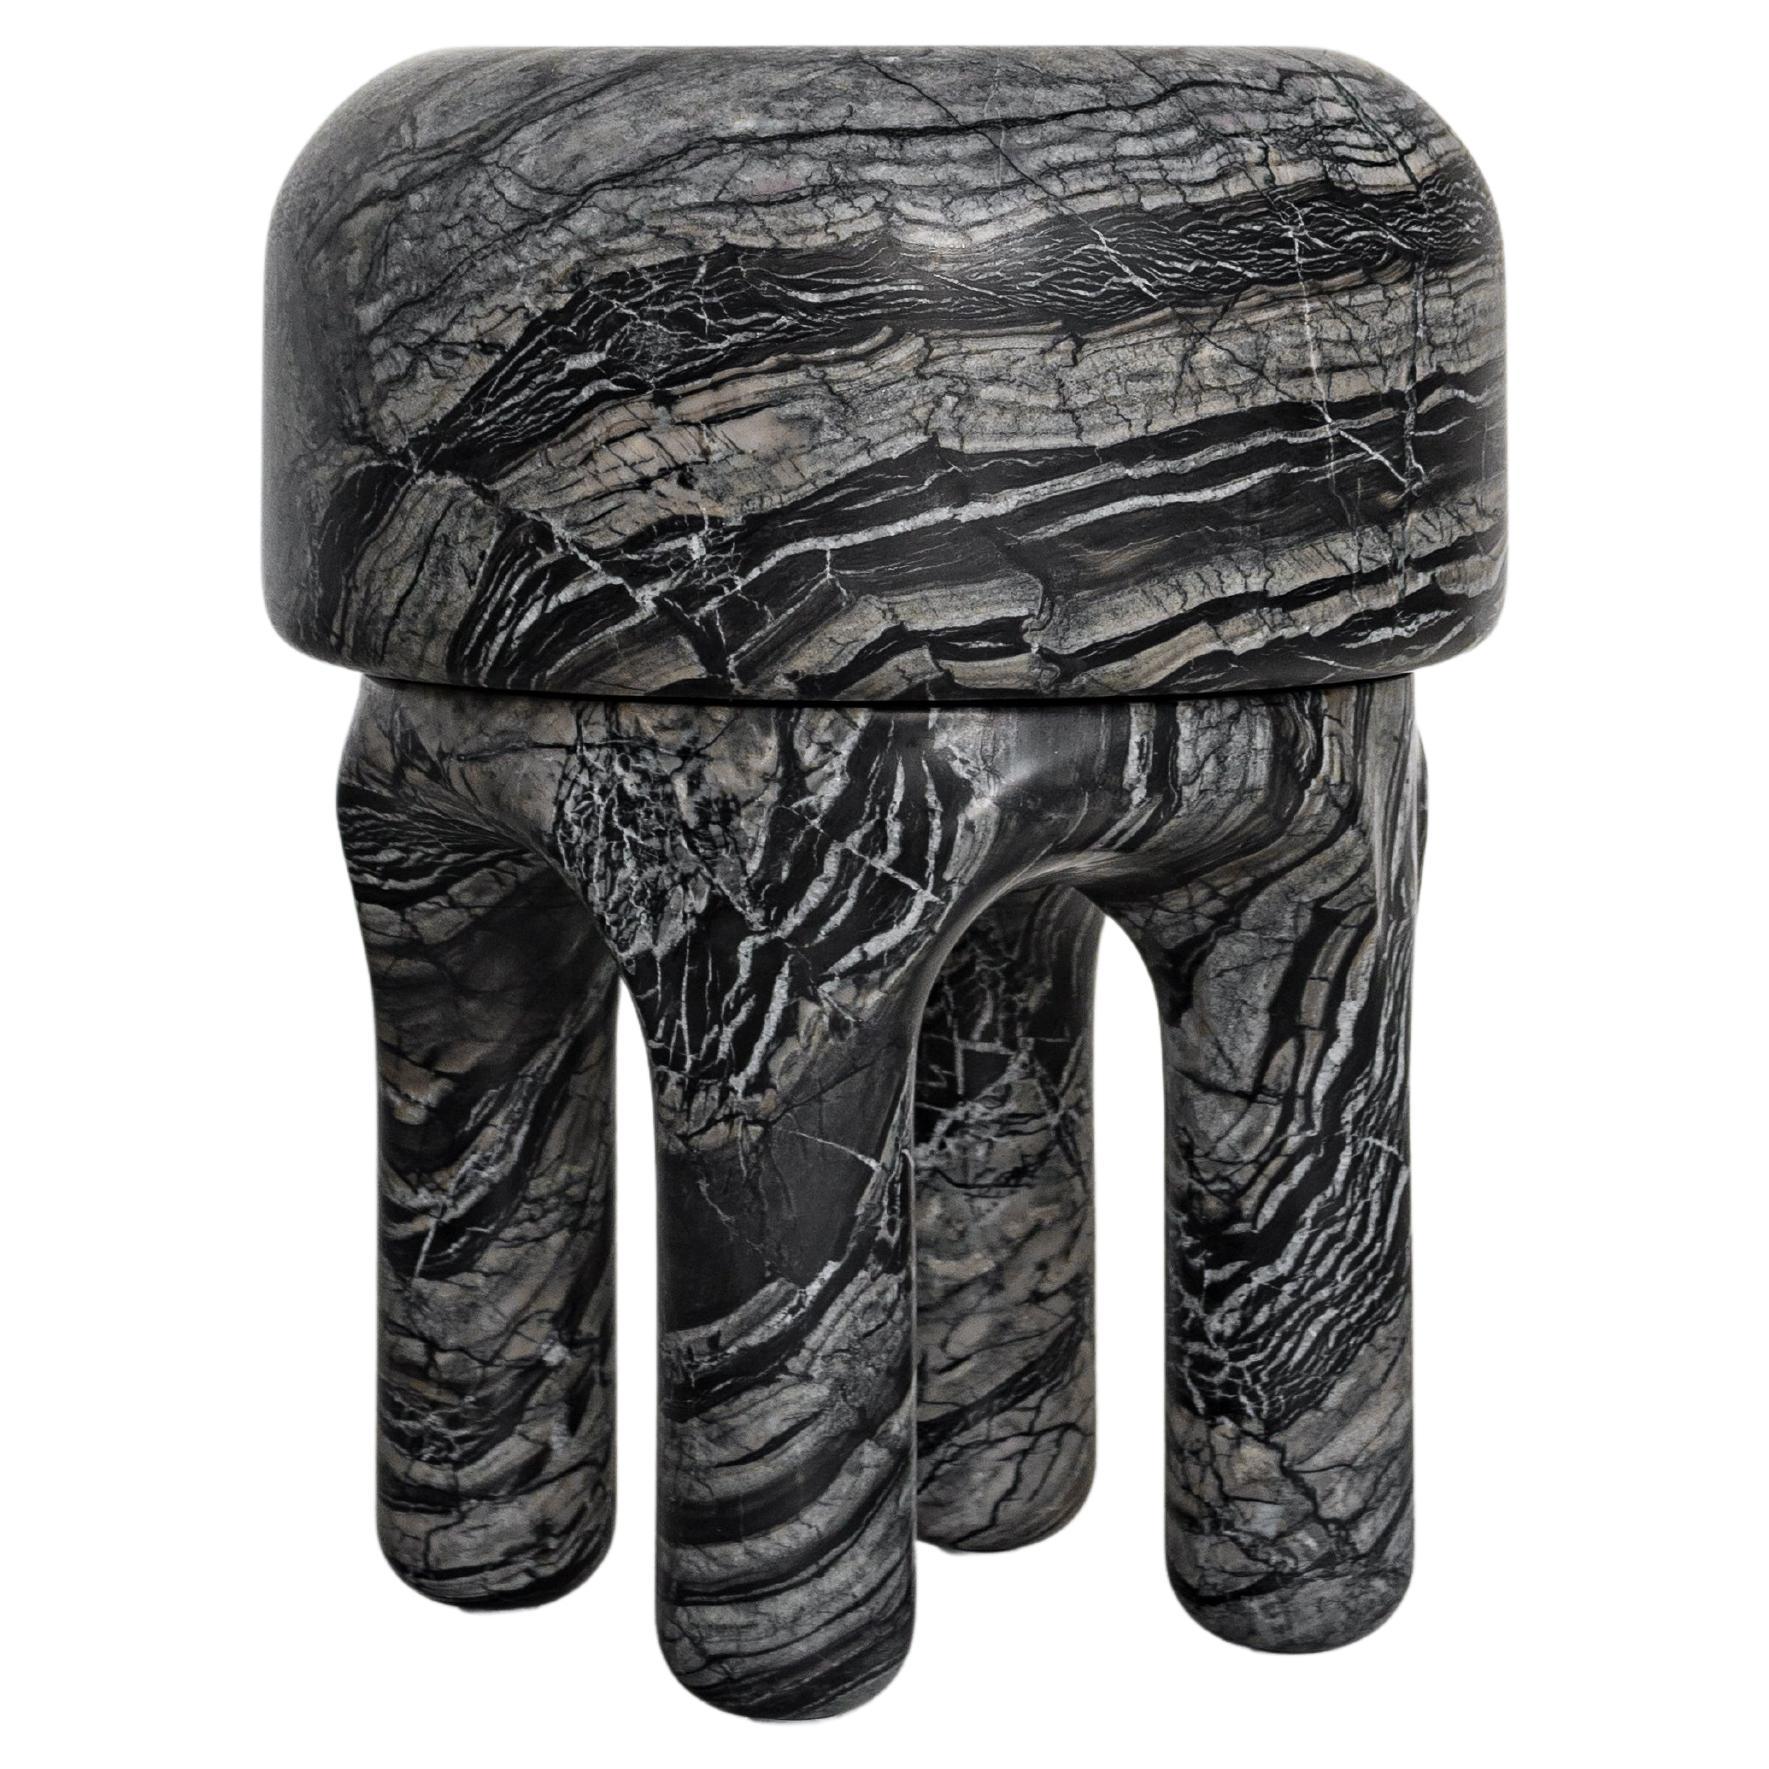 Contemporary 21st Century Spinzi Medusa Kenya Marble Stool, Collectible Design For Sale